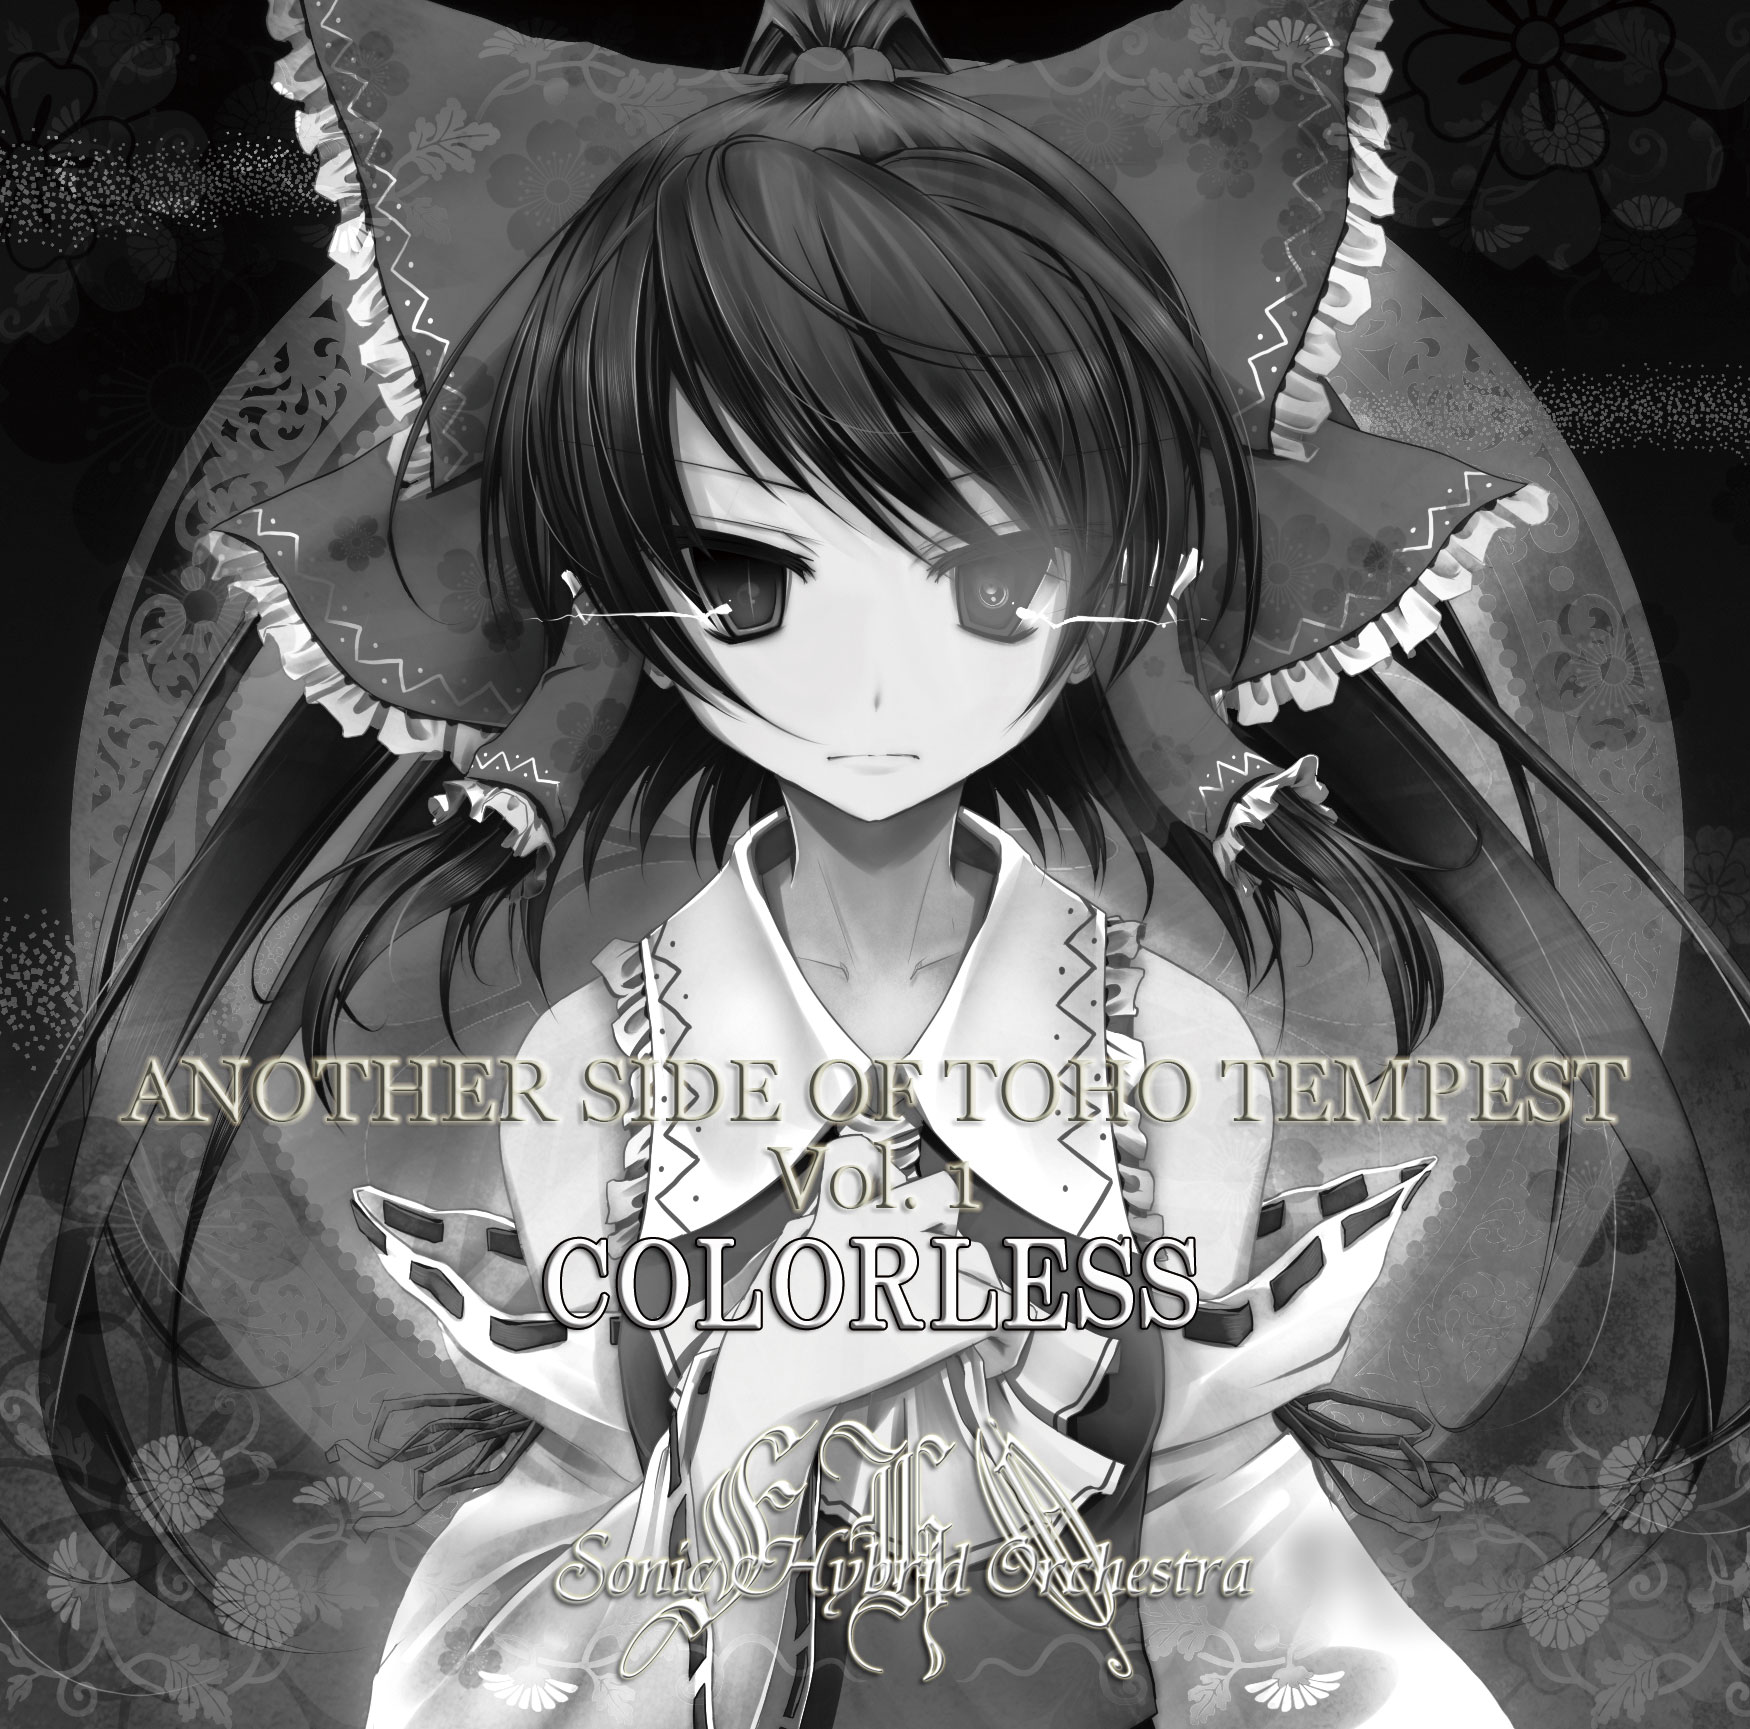 ANOTHER SIDE OF TOHO TEMPEST Vol.1 -COLORLESS- | Touhou Wiki | Fandom